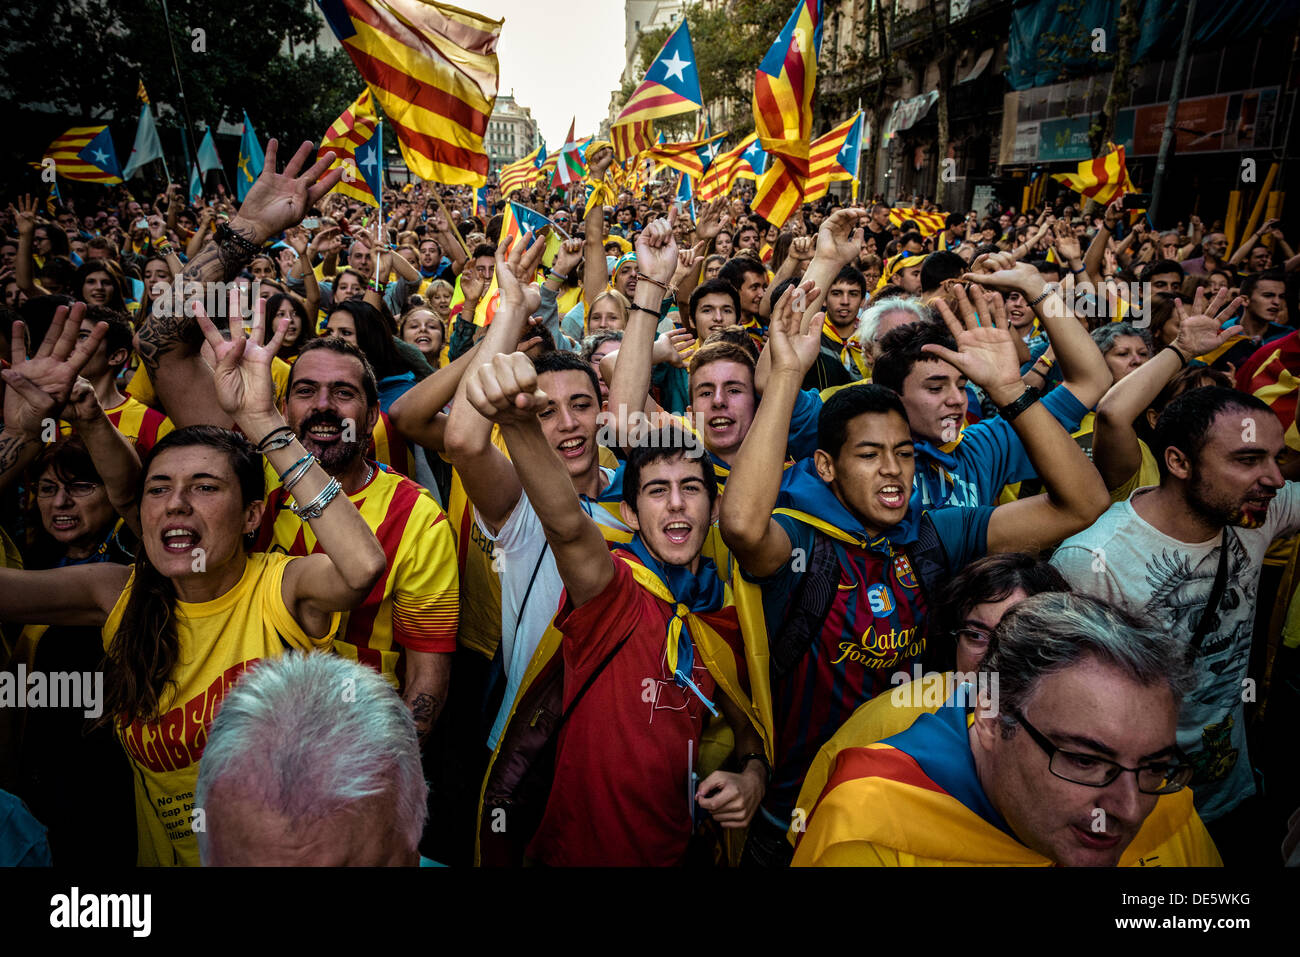 Barcelona, Spain. September 11th, 2013: Thousands gather in the streets of Barcelona to demand the independence of Catalonia on its national day © matthi/Alamy Live News Stock Photo